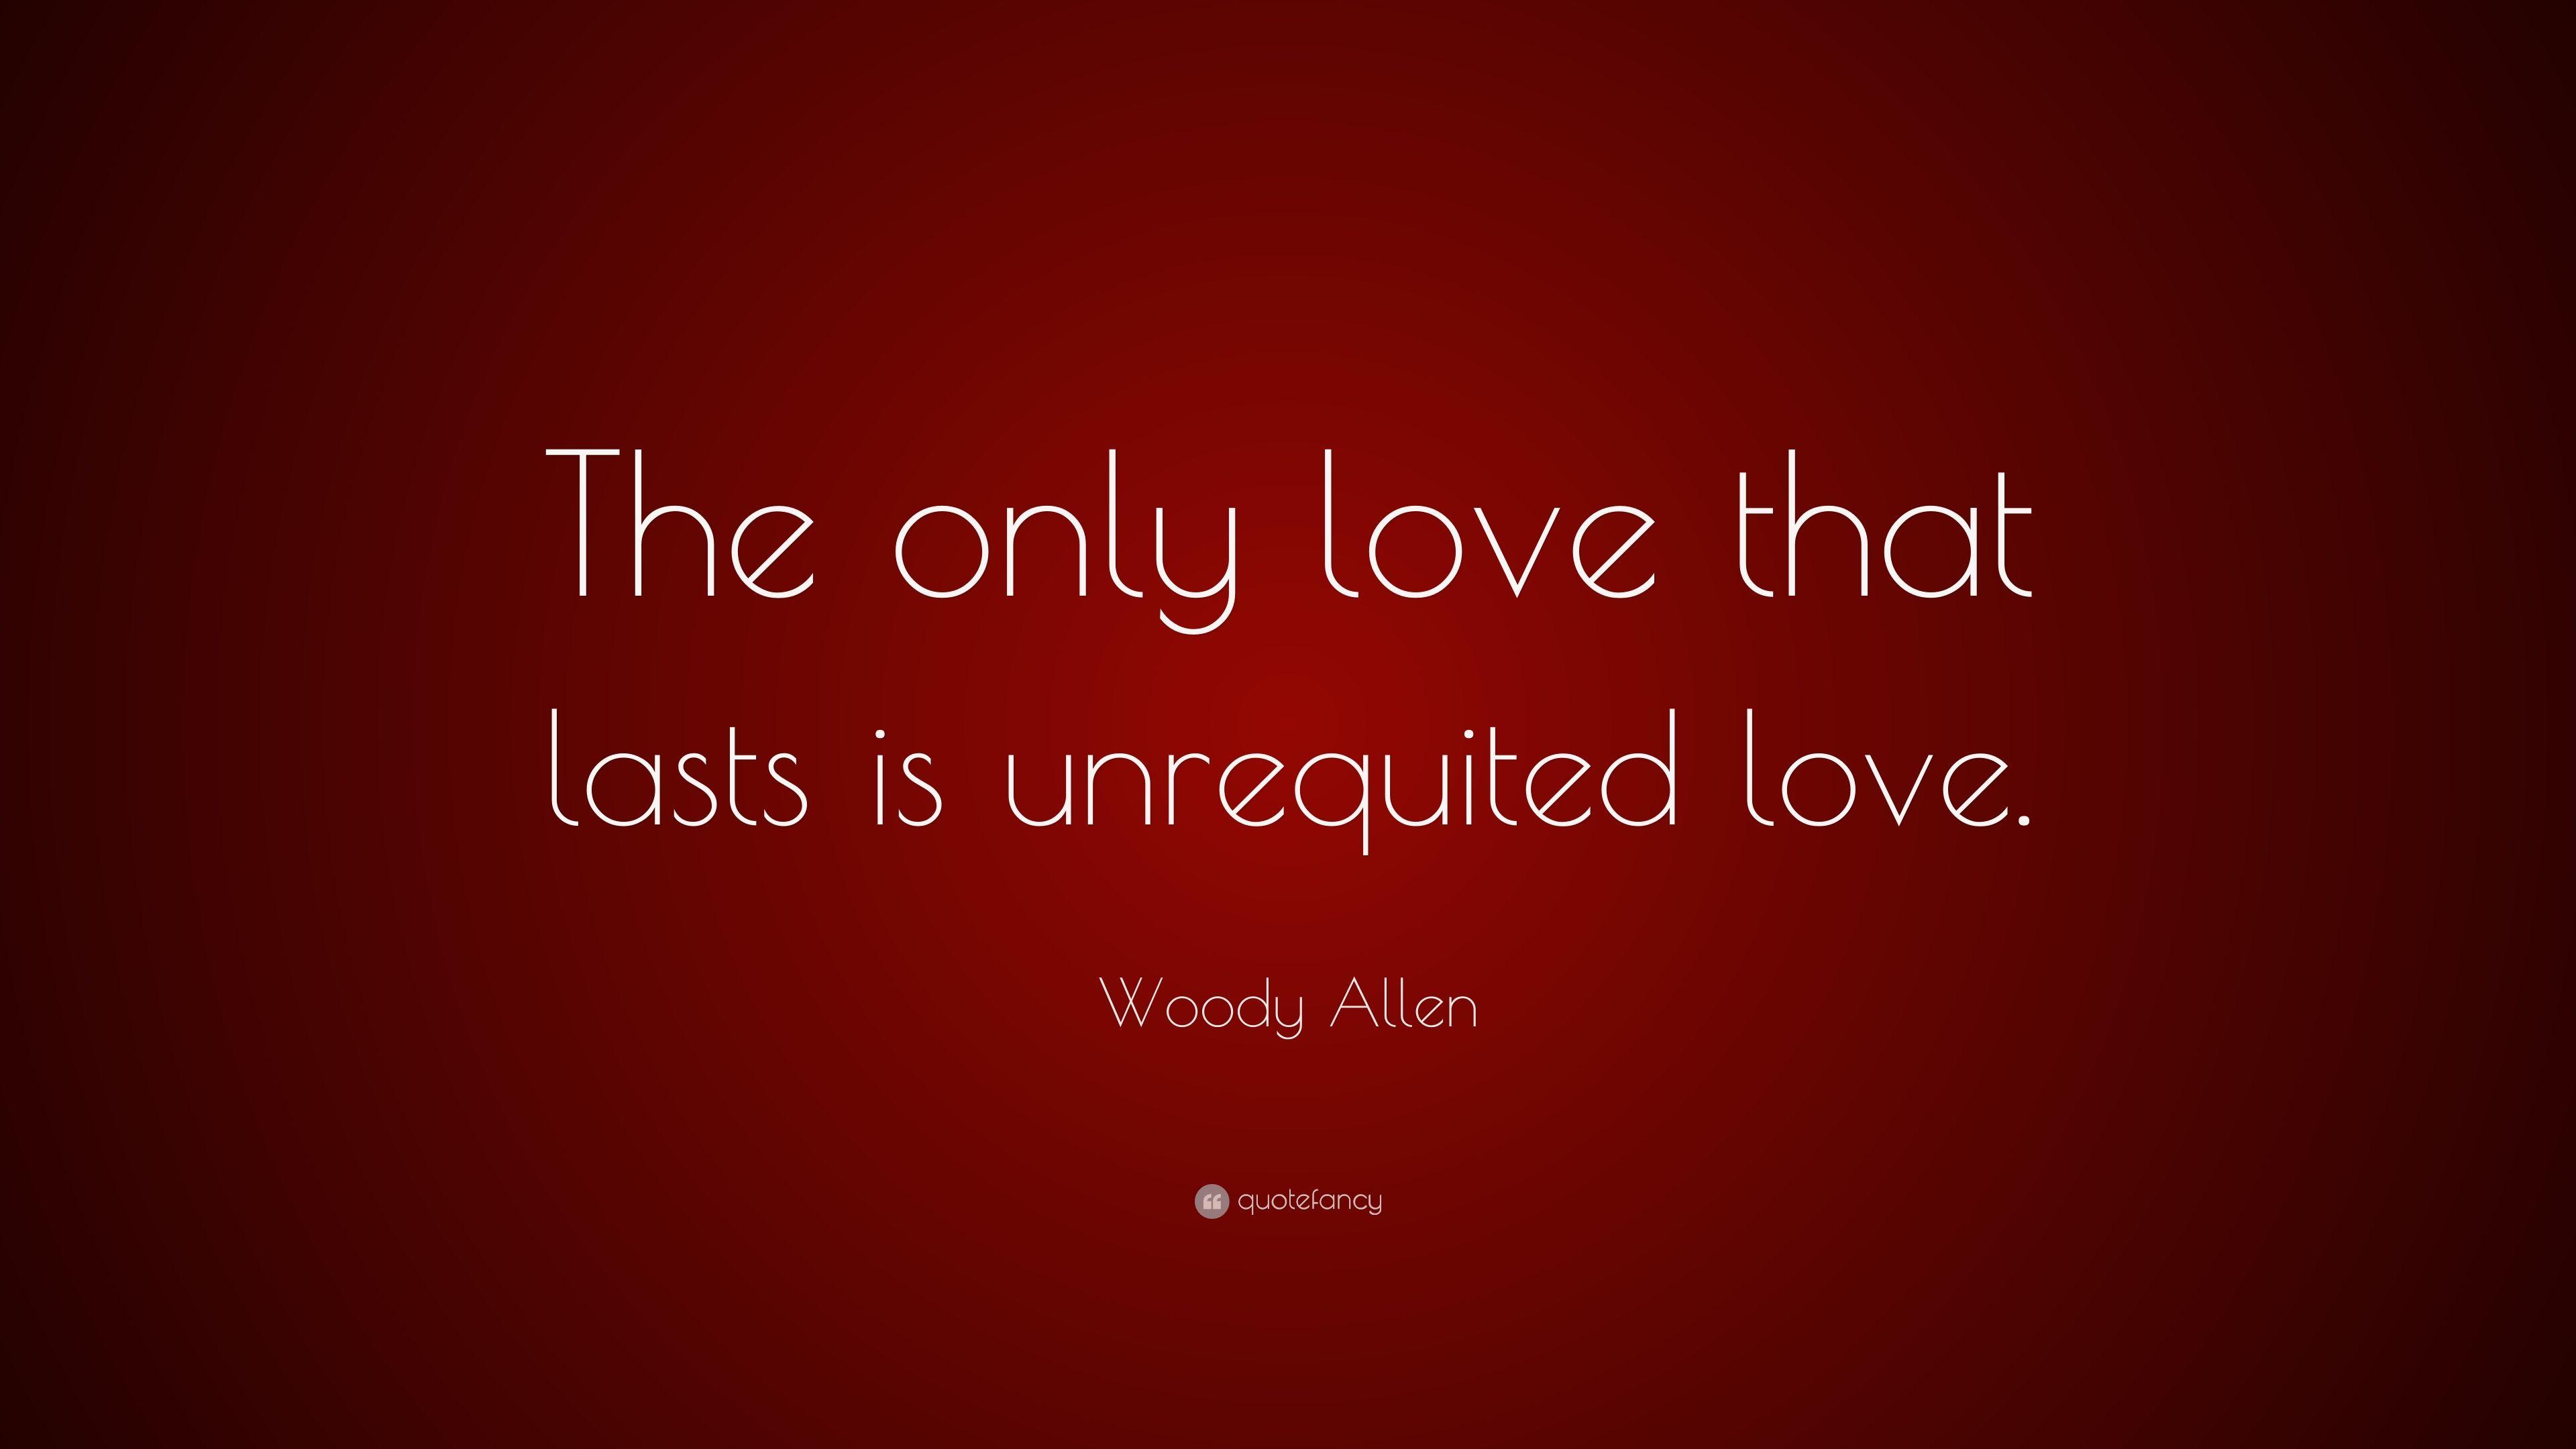 Woody Allen Quote: “The only love that. Love quotes